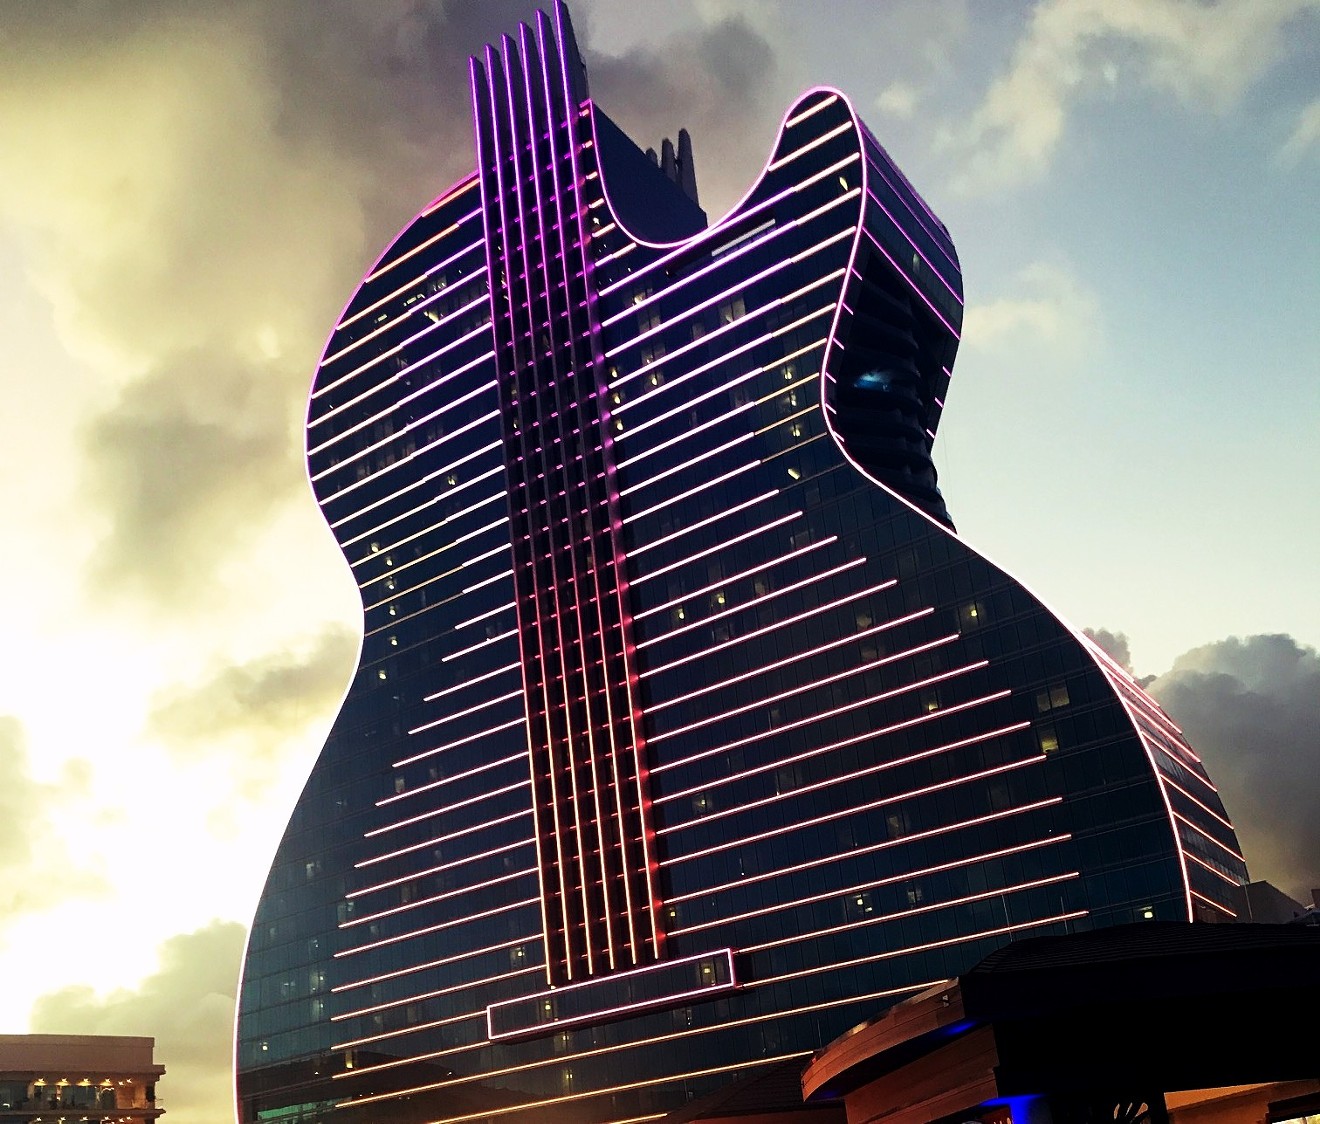 The Hard Rock Guitar Hotel at sunset. See more photos of the new Guitar Hotel here.